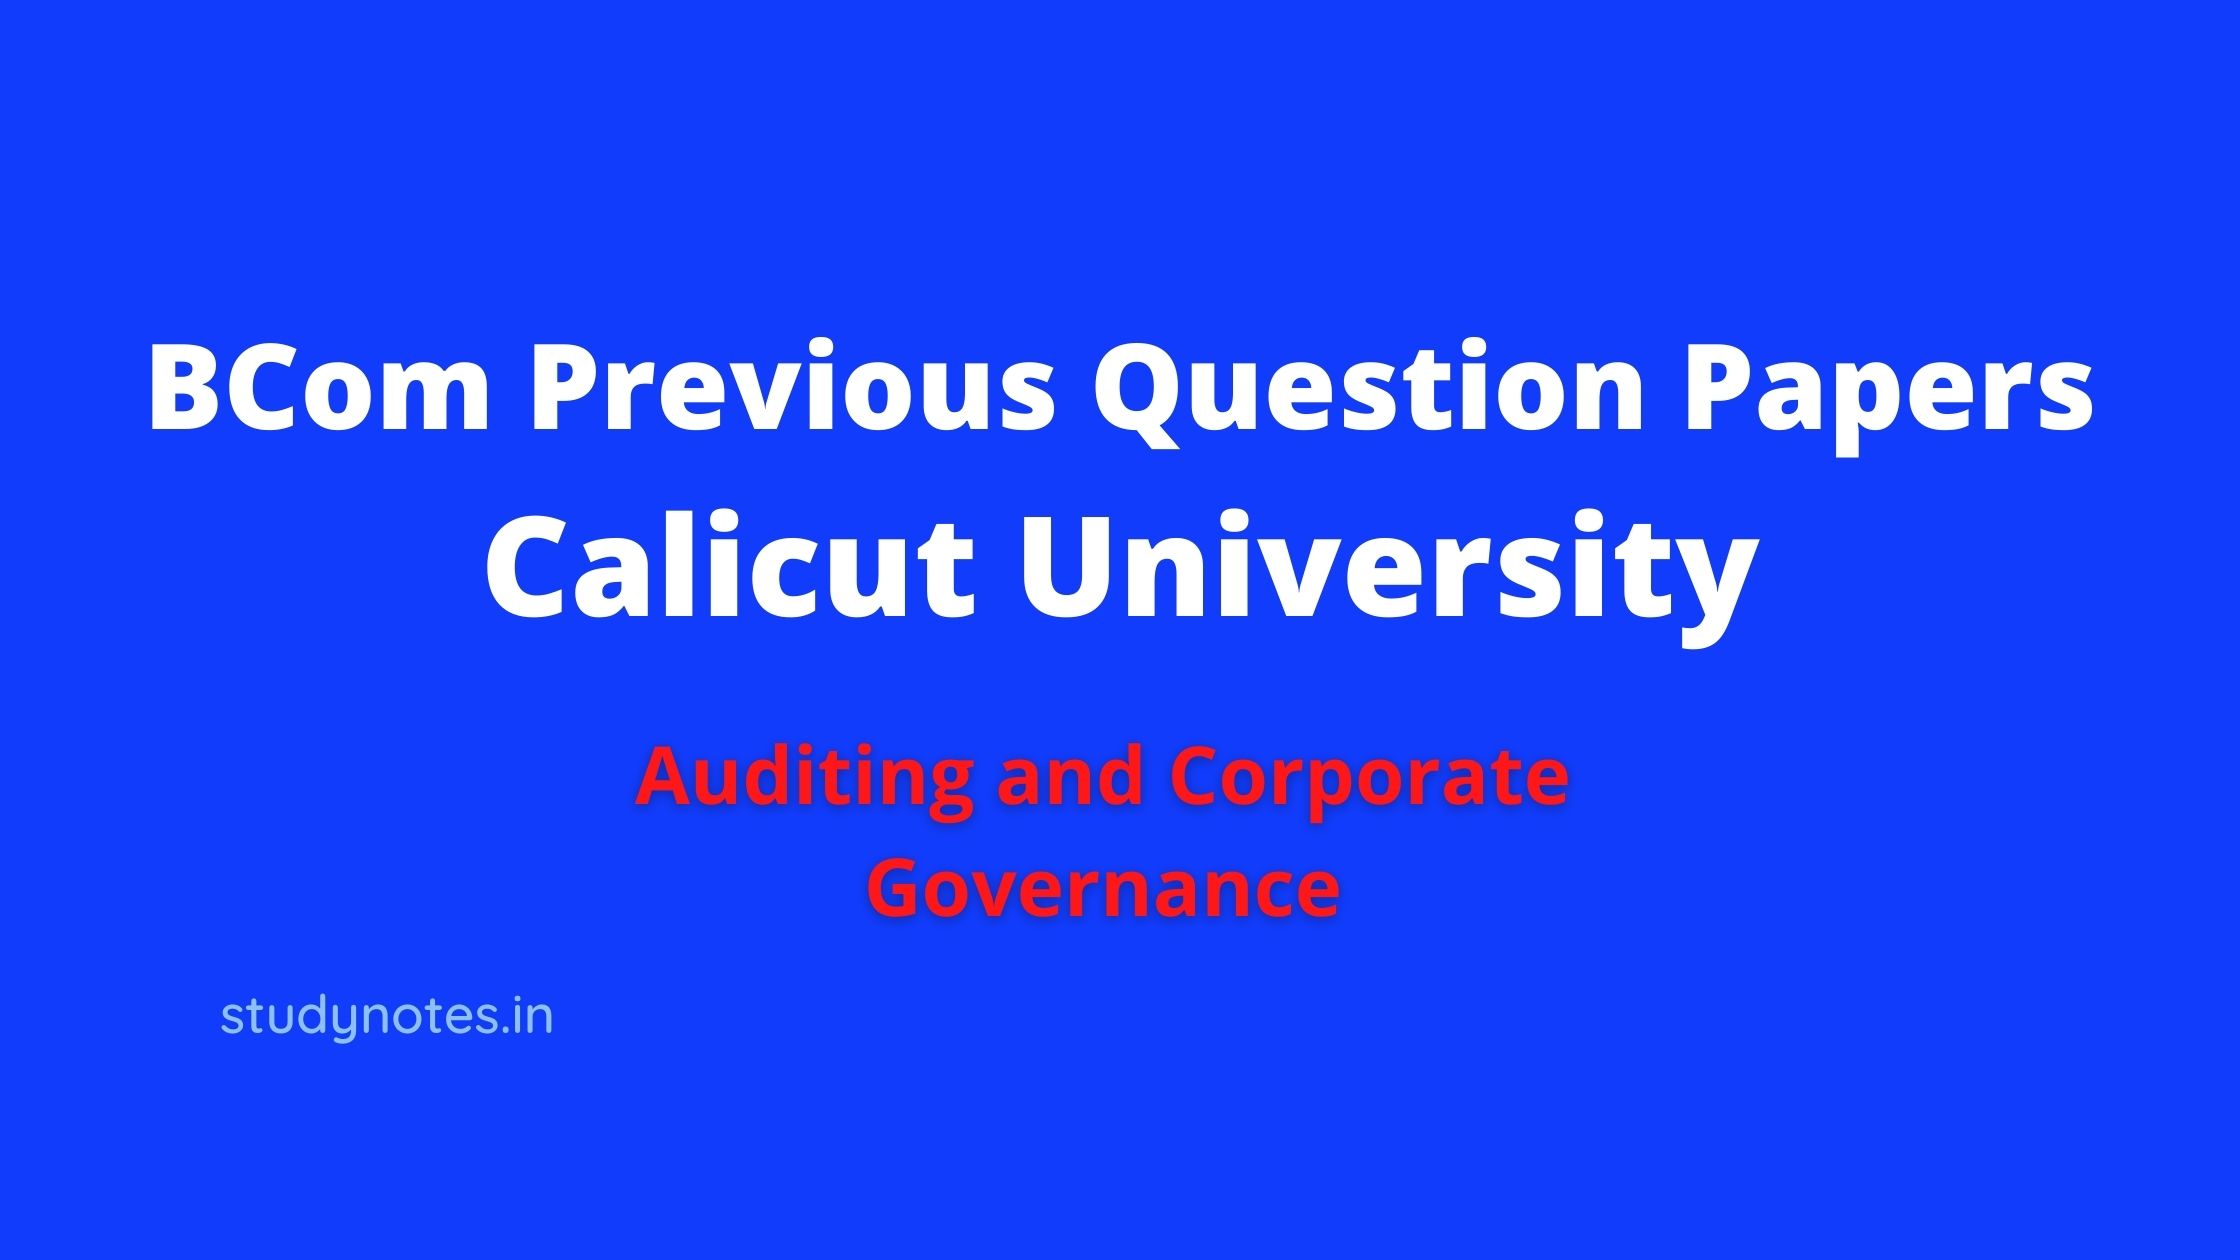 Auditing and Corporate Governance qp